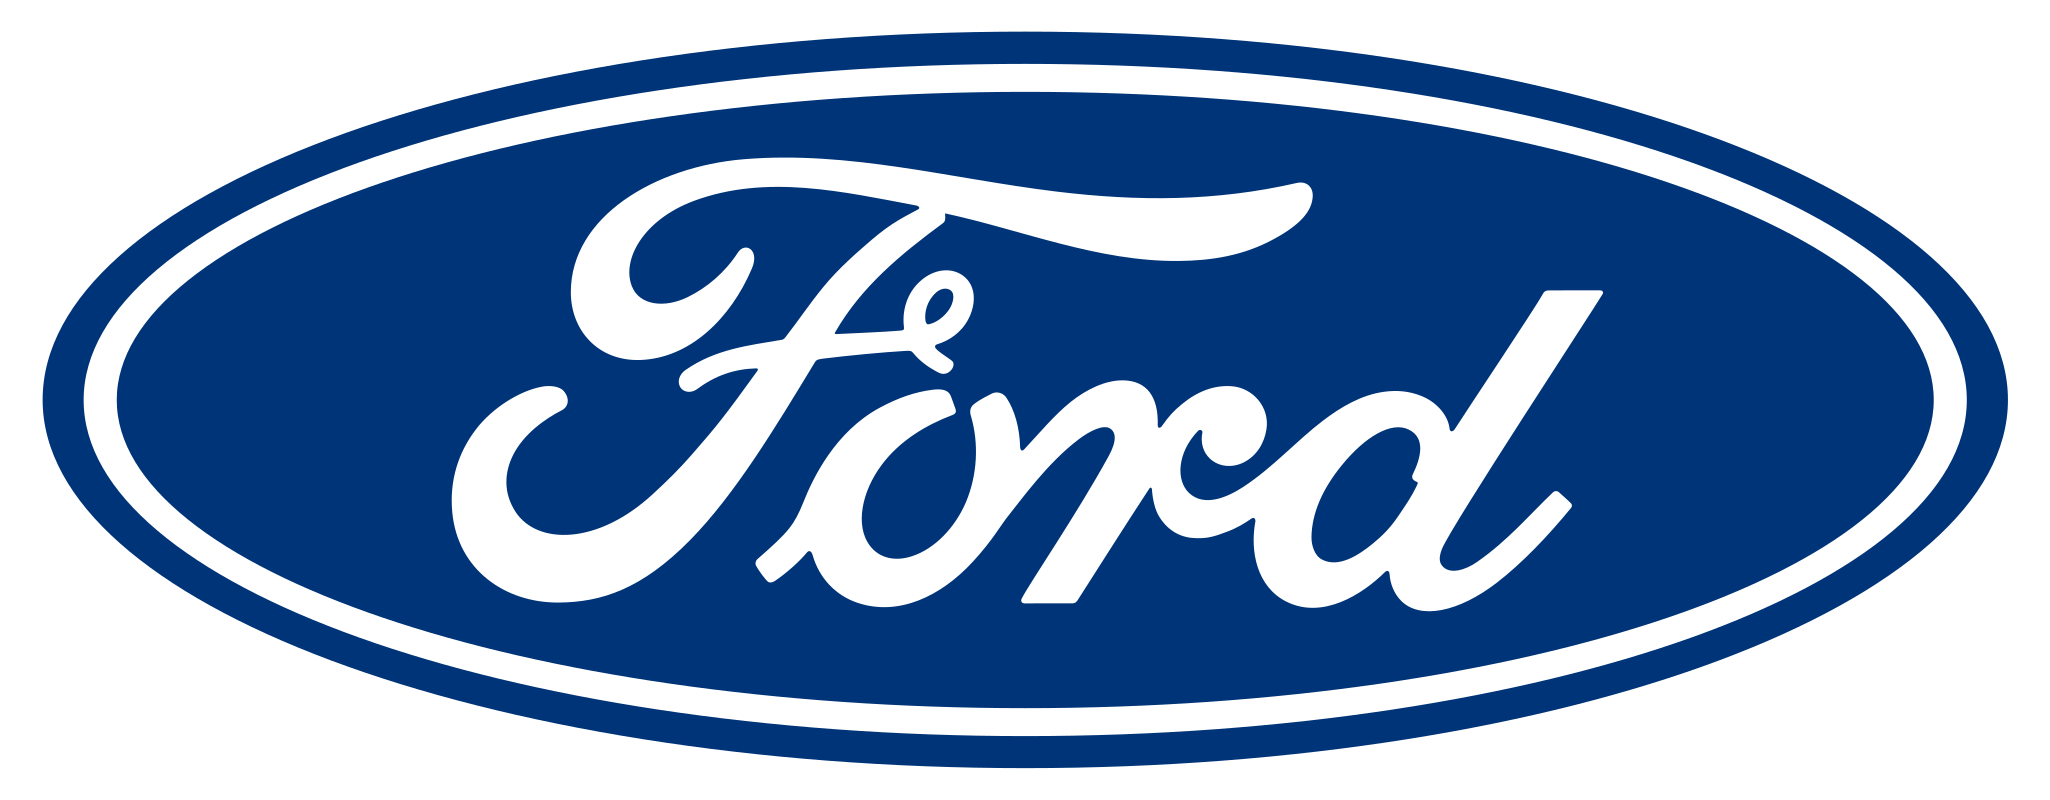 logo-ford-2017.png